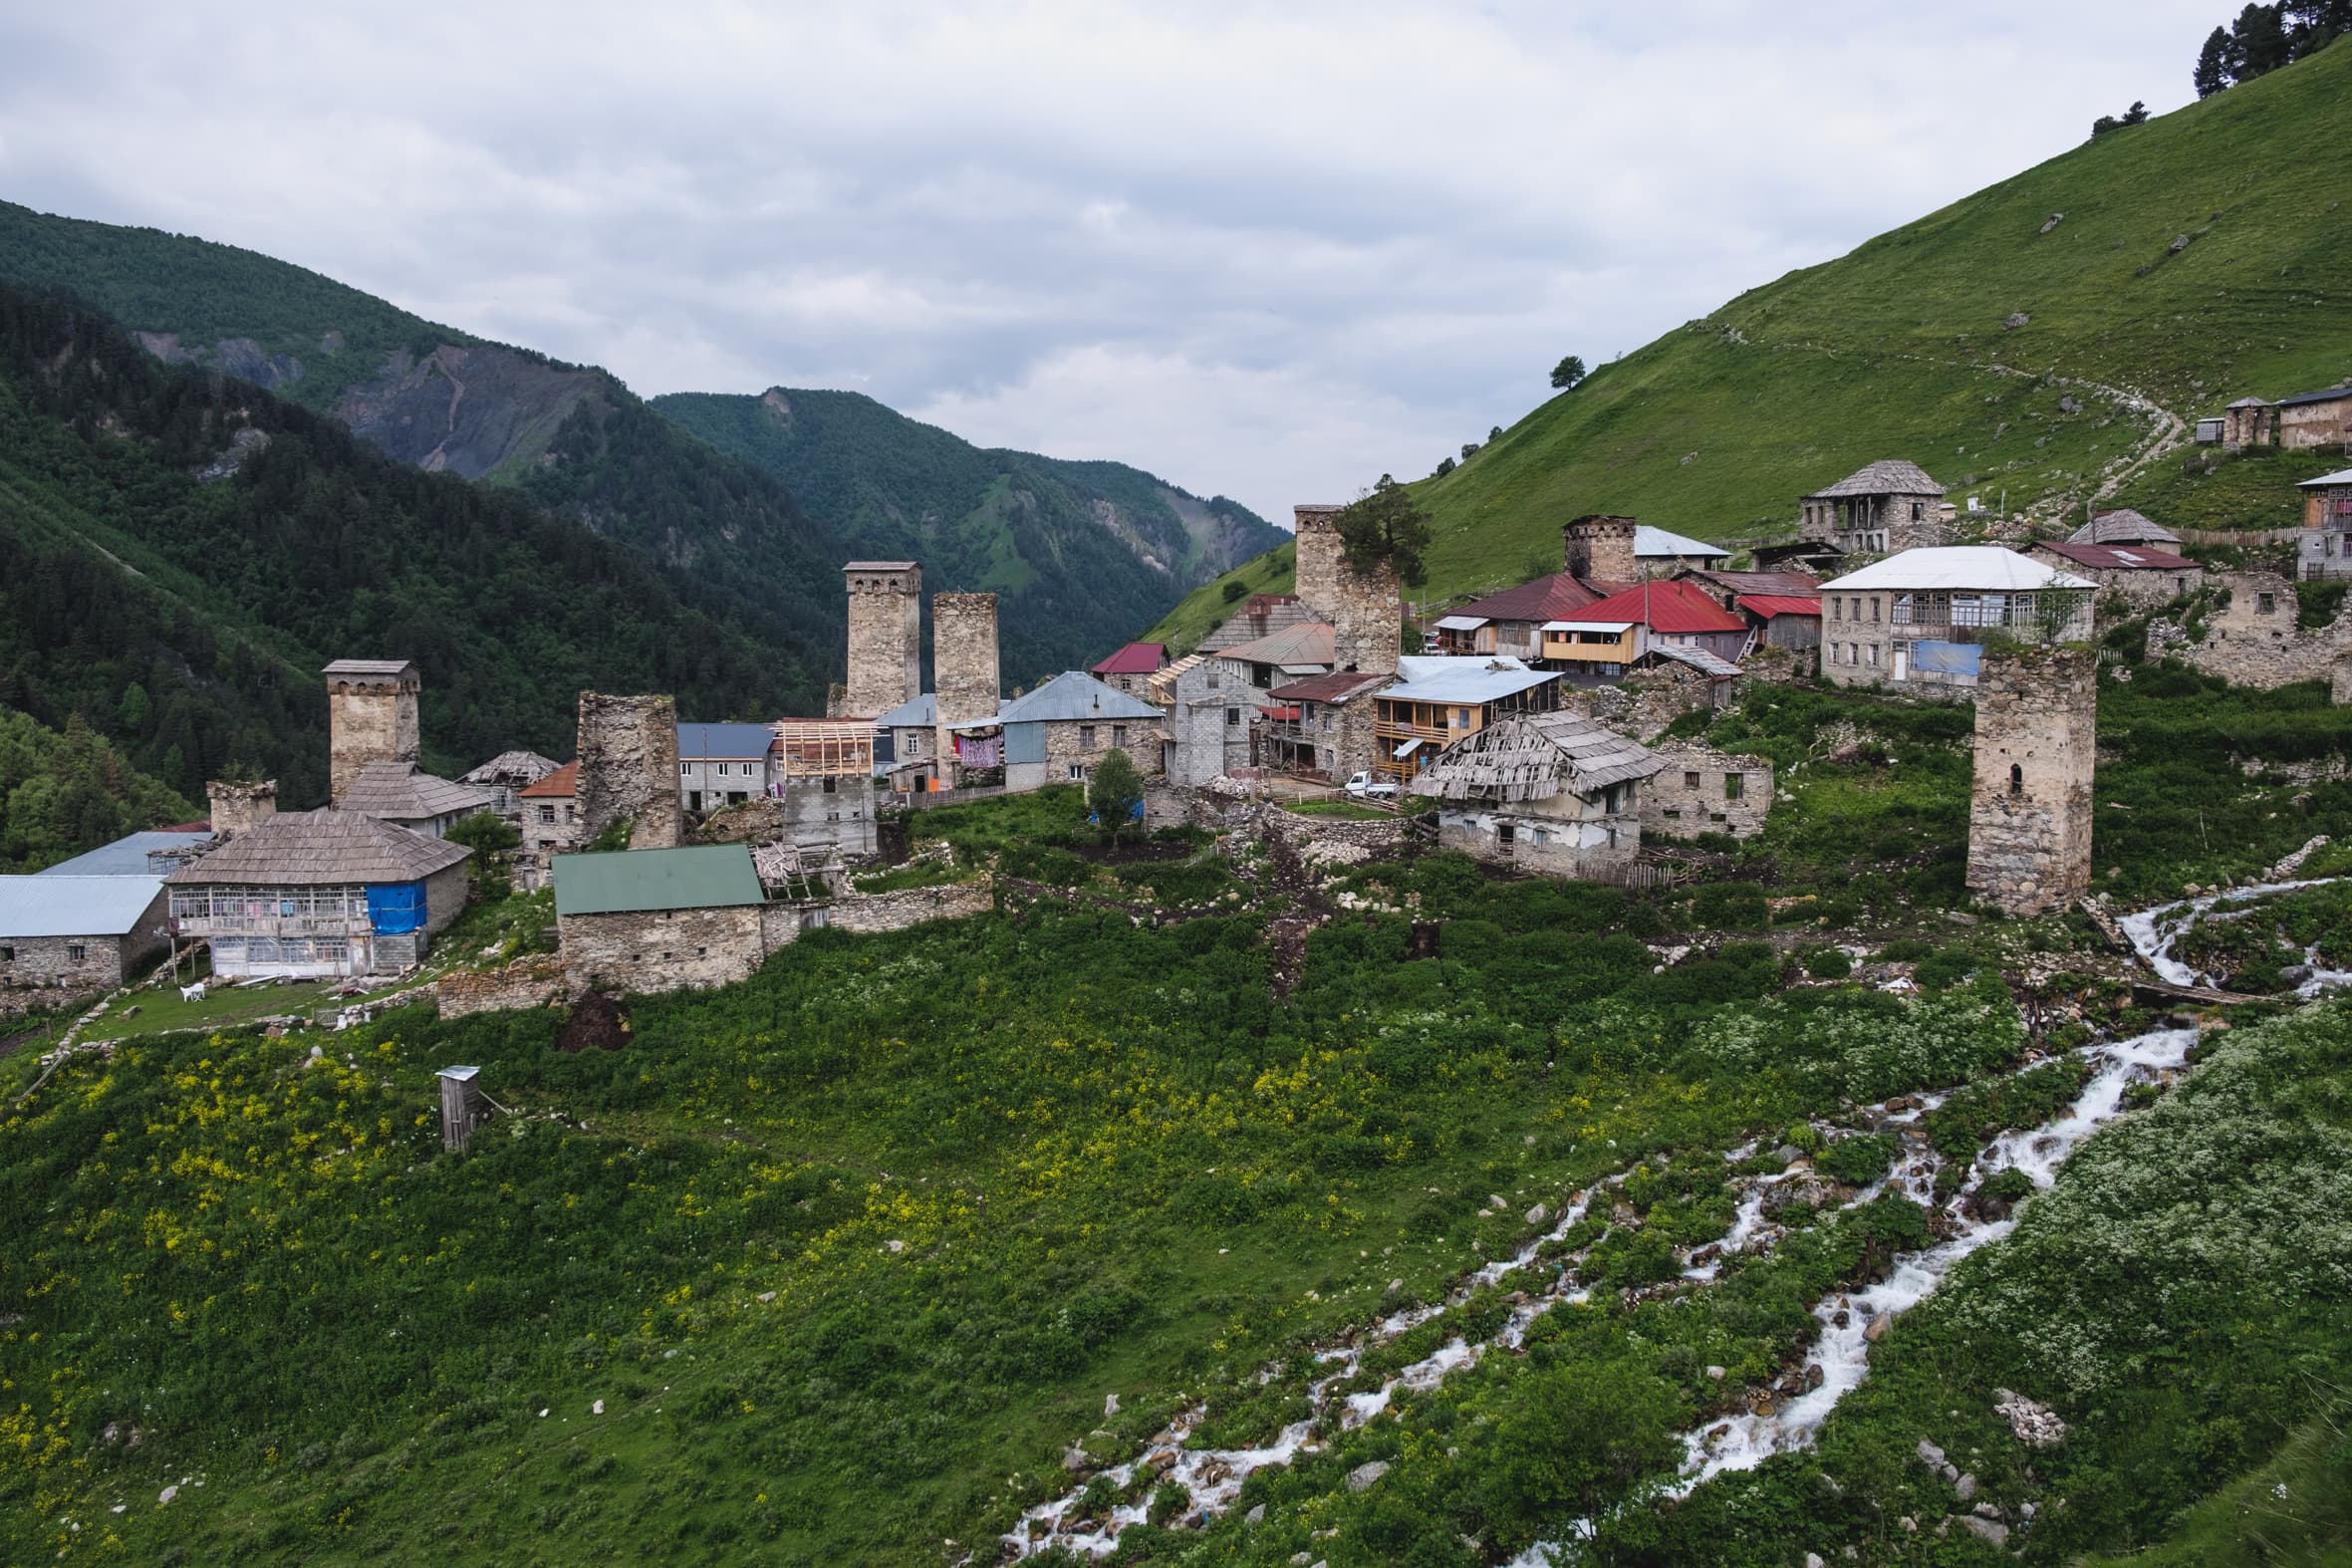 The village of Adishi with its Svan towers and a stream flowing by, situated on a mountain slope, Svaneti